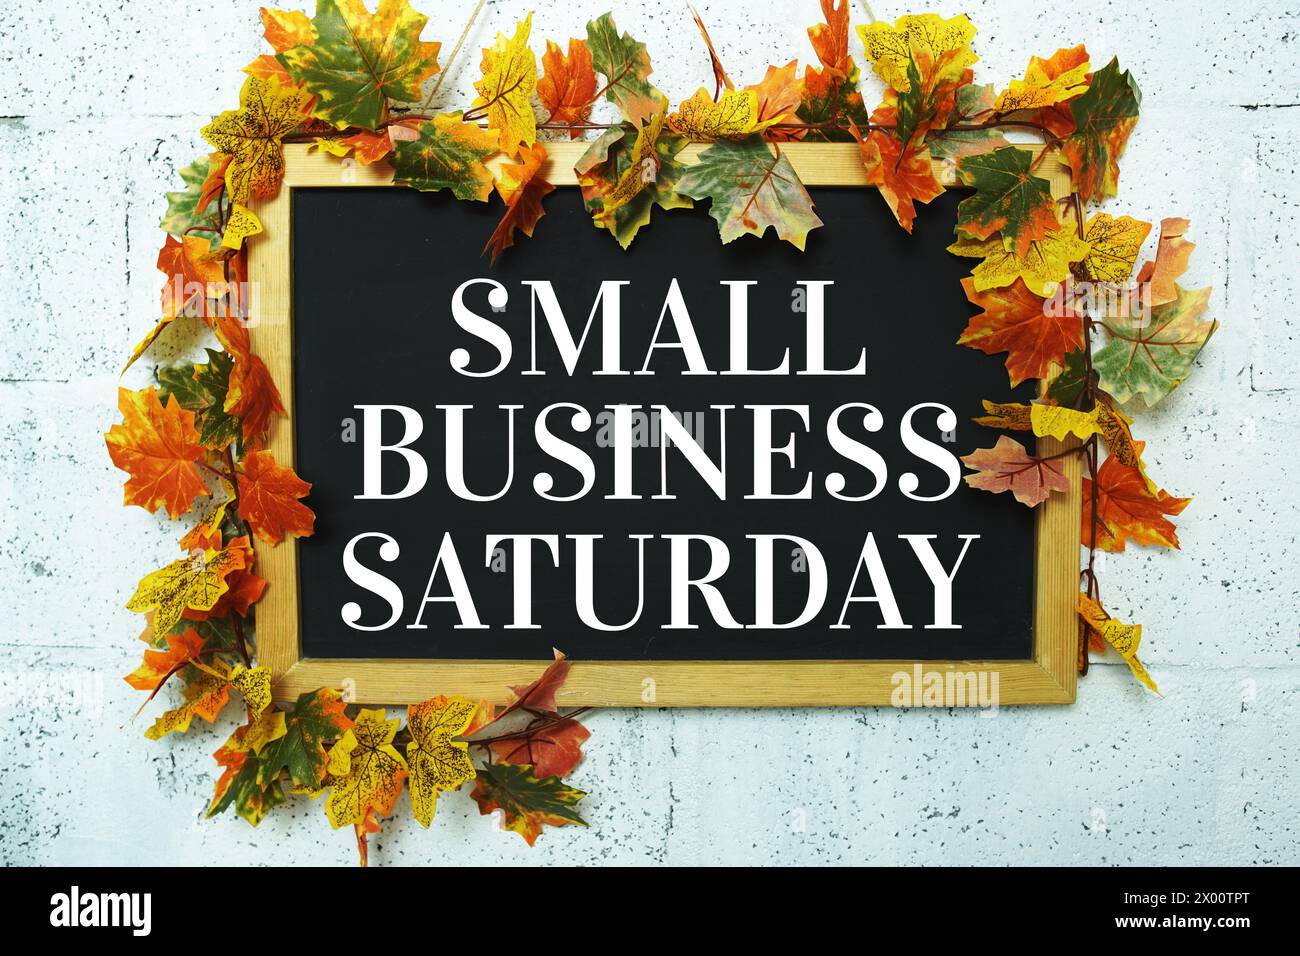 Small Business Saturday typography text on wooden blackboard hanging with maple leaf decoration Stock Photo